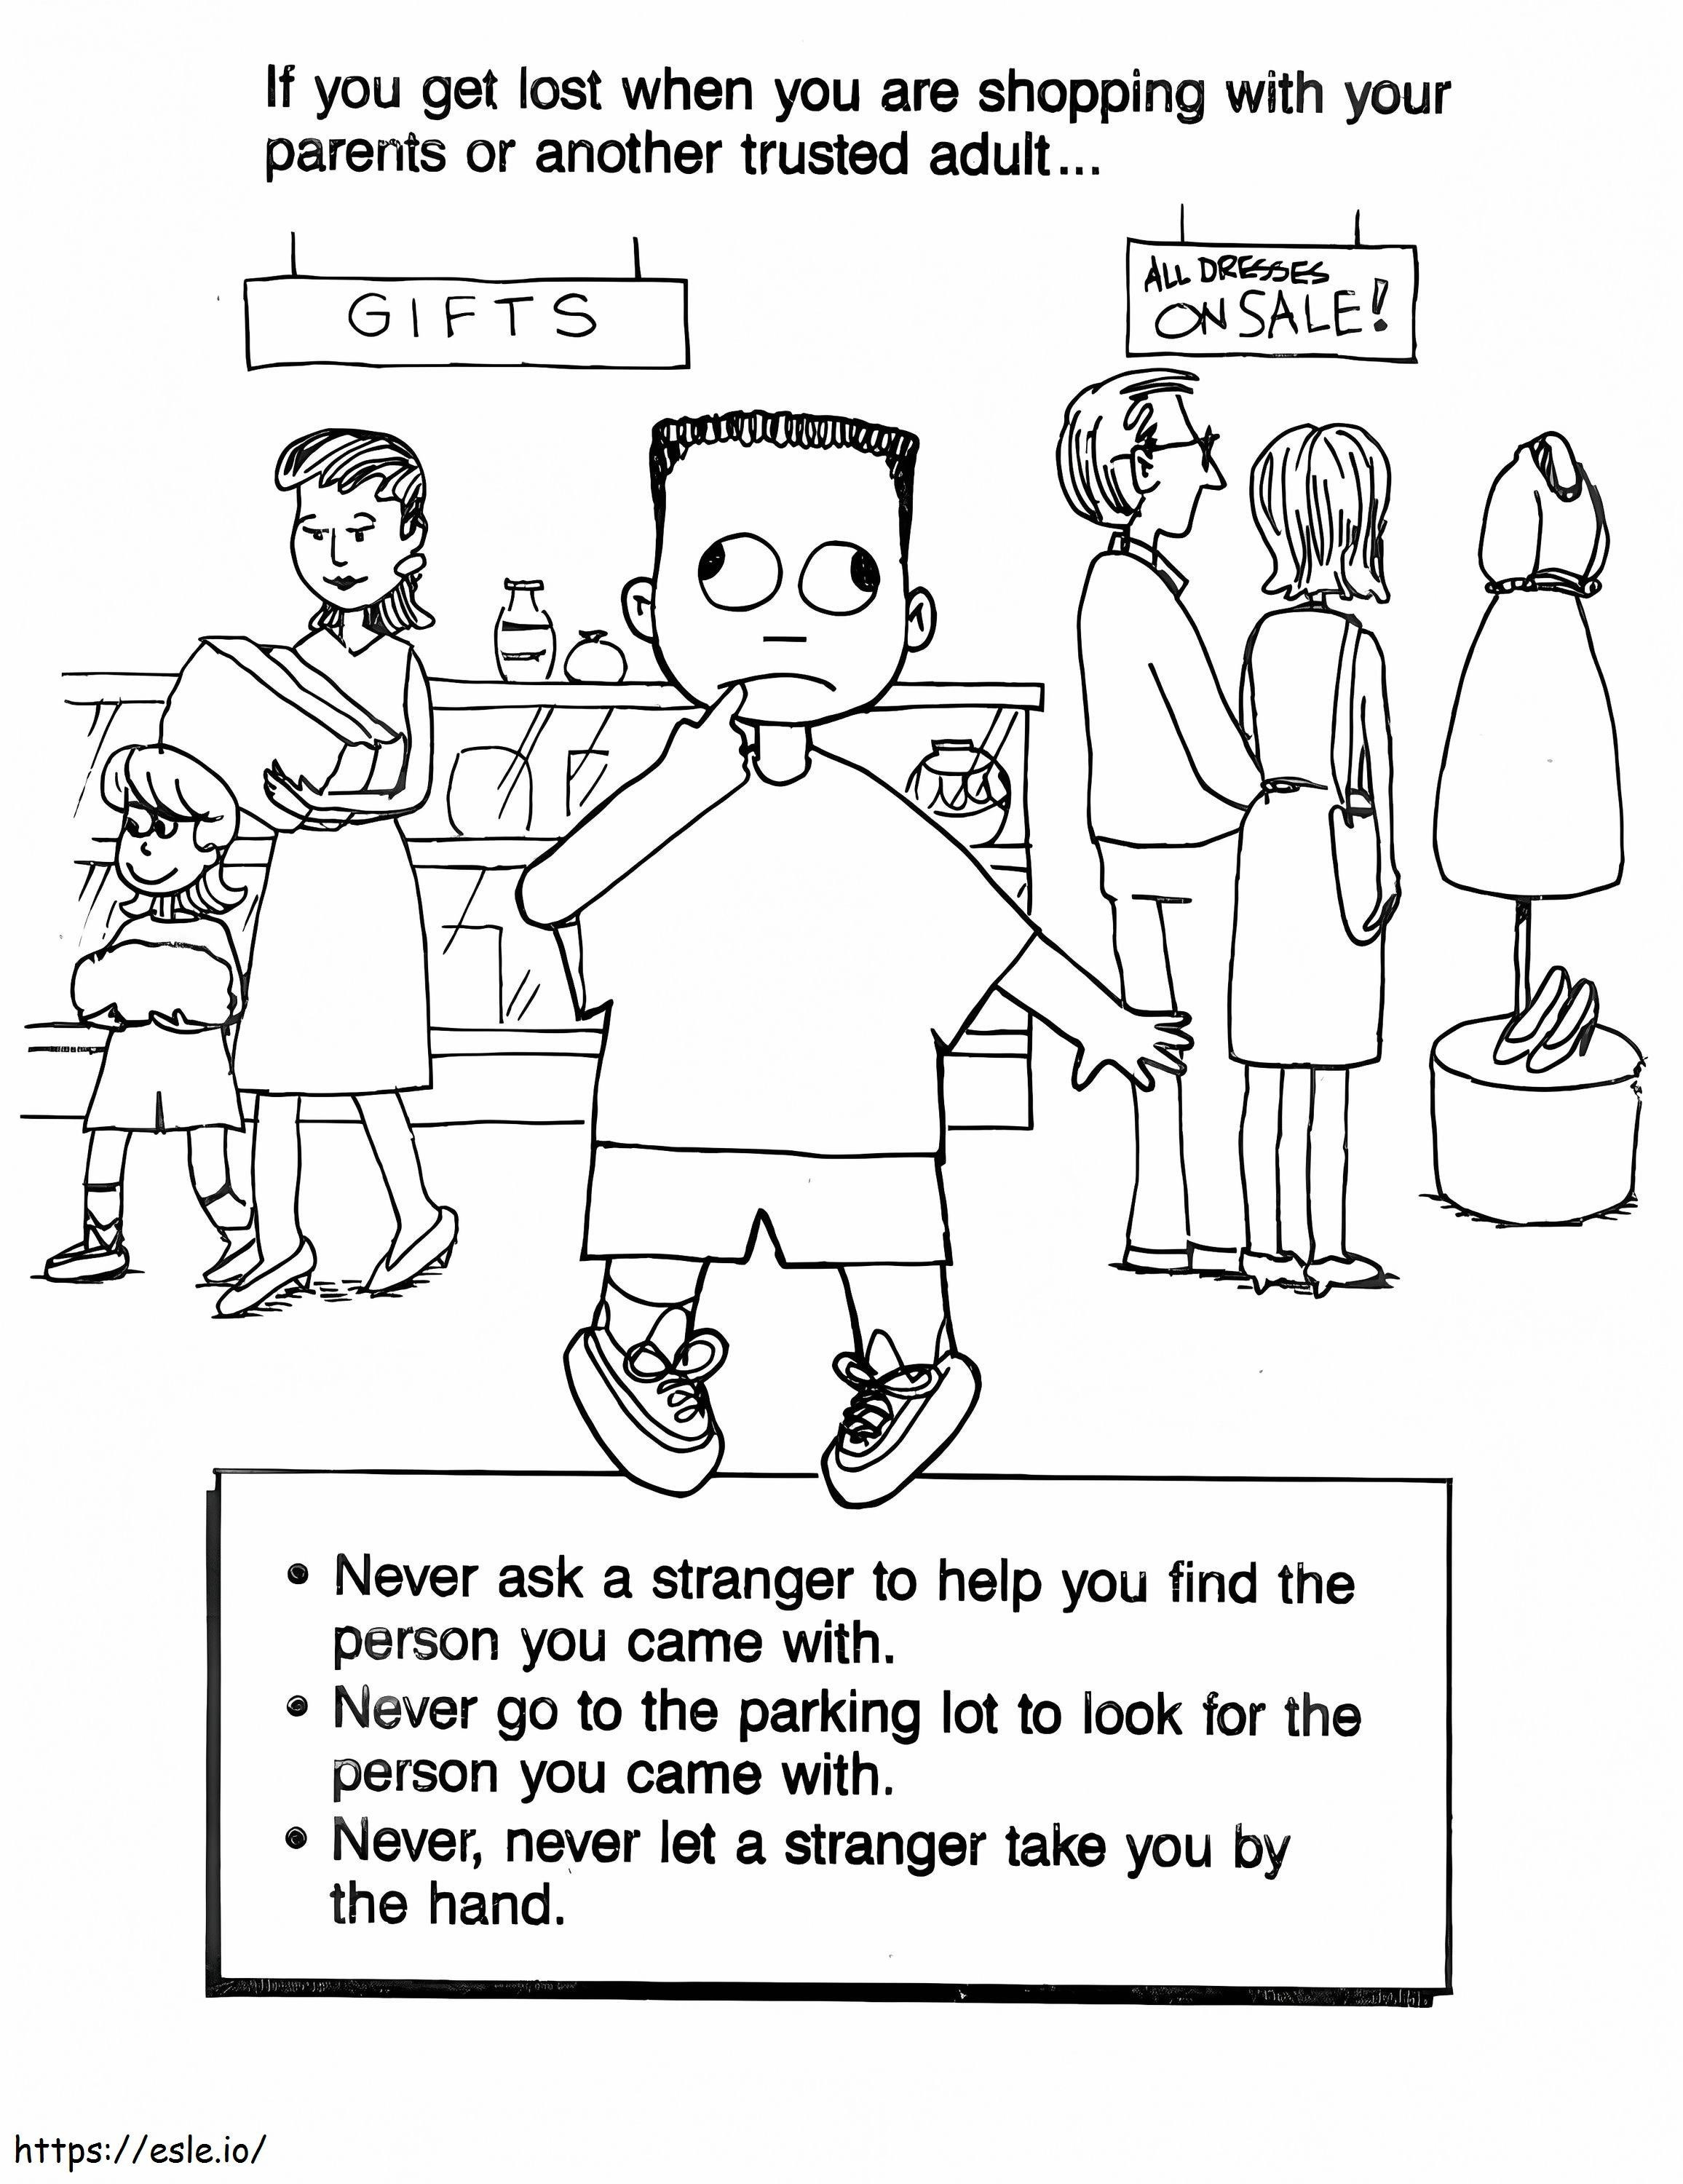 Get Lost Safety coloring page